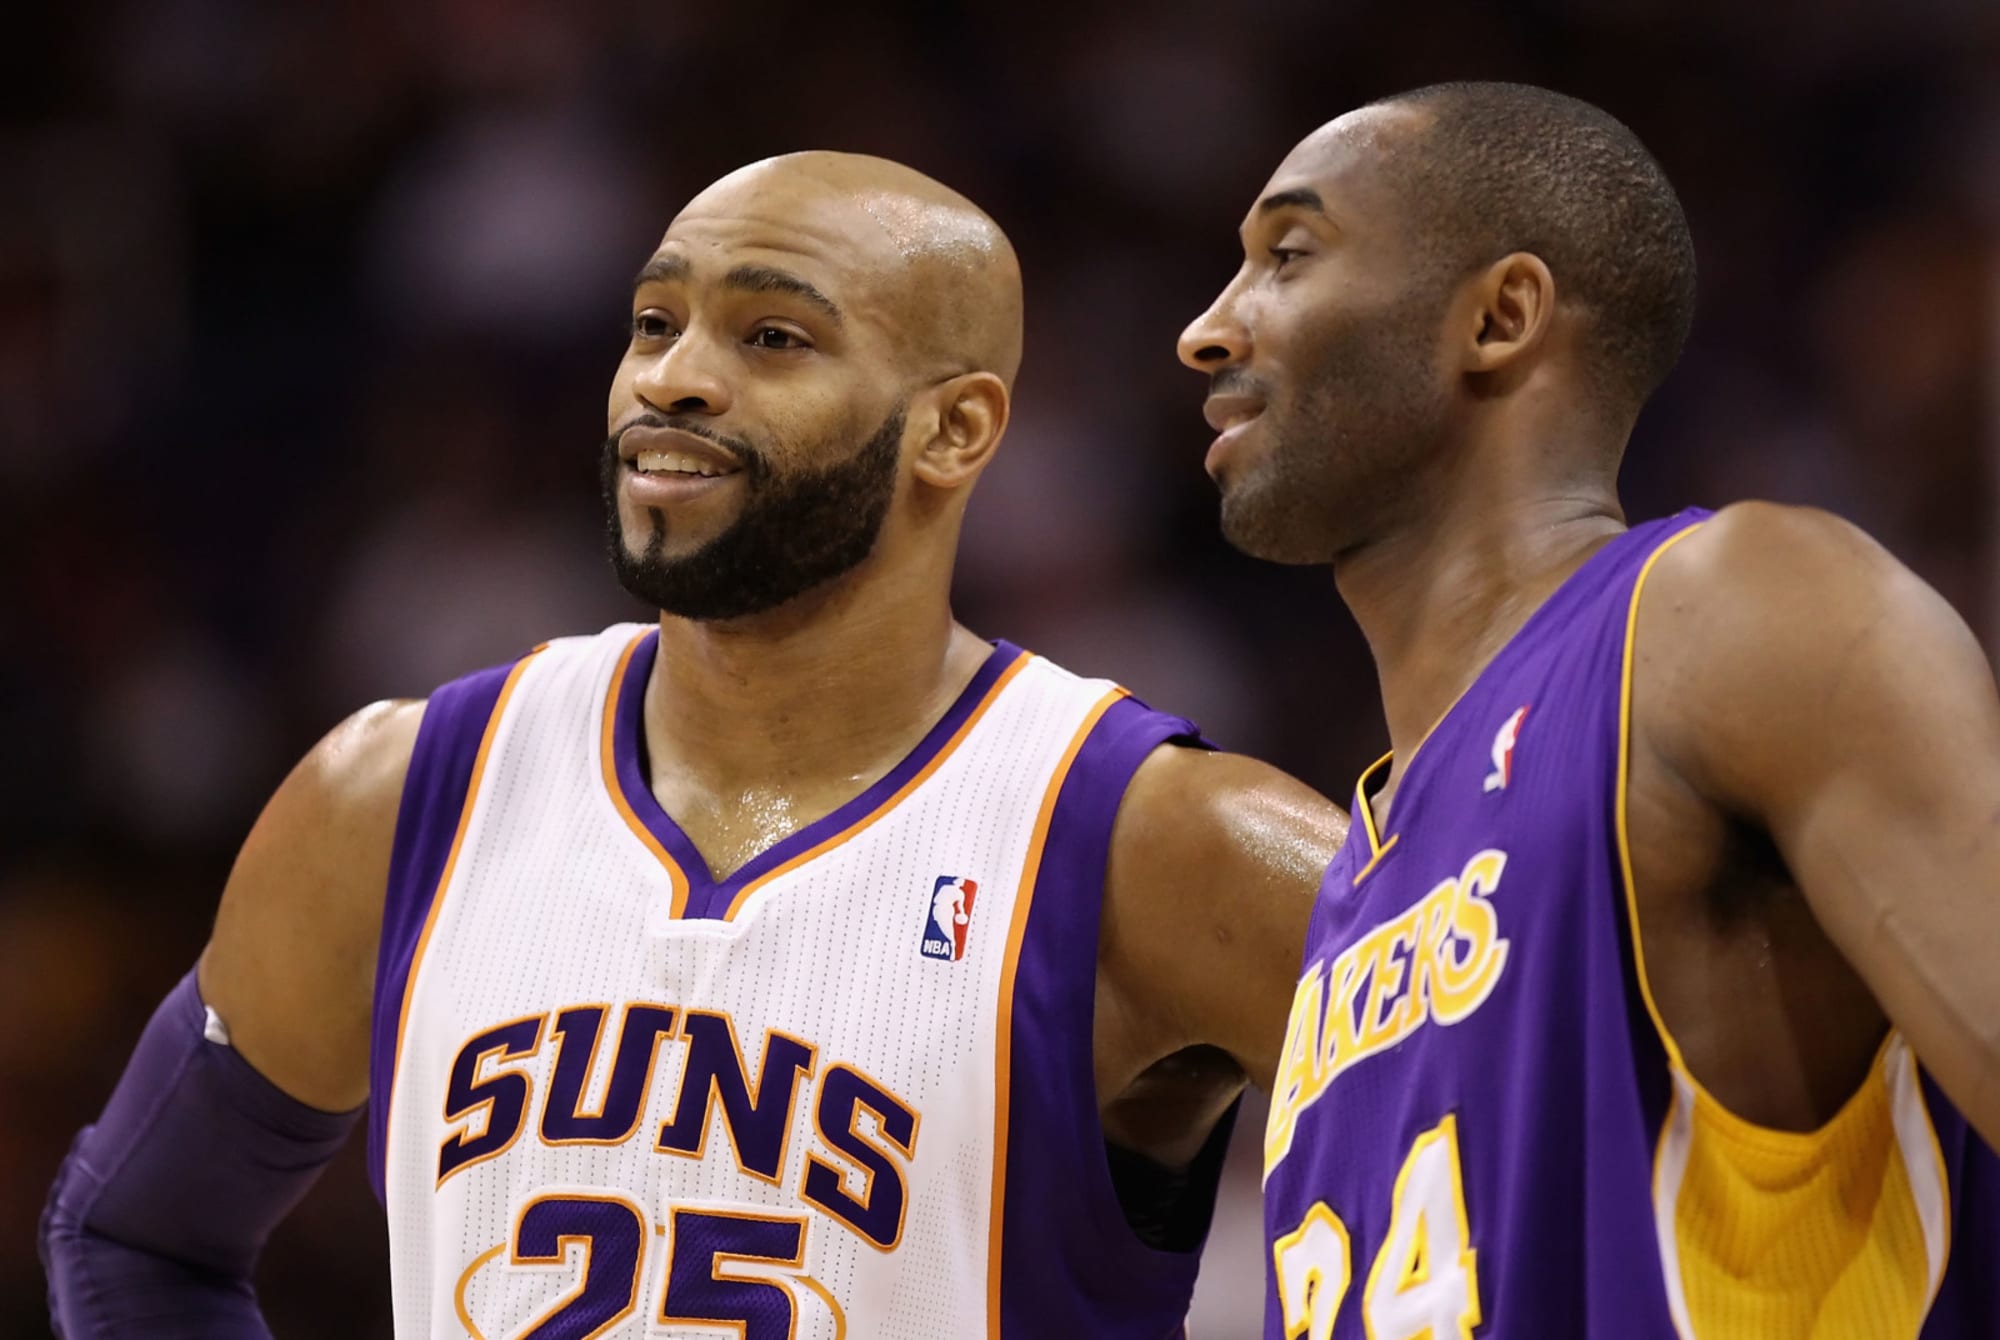 Vince Carter Waived By Phoenix Suns, According To Report